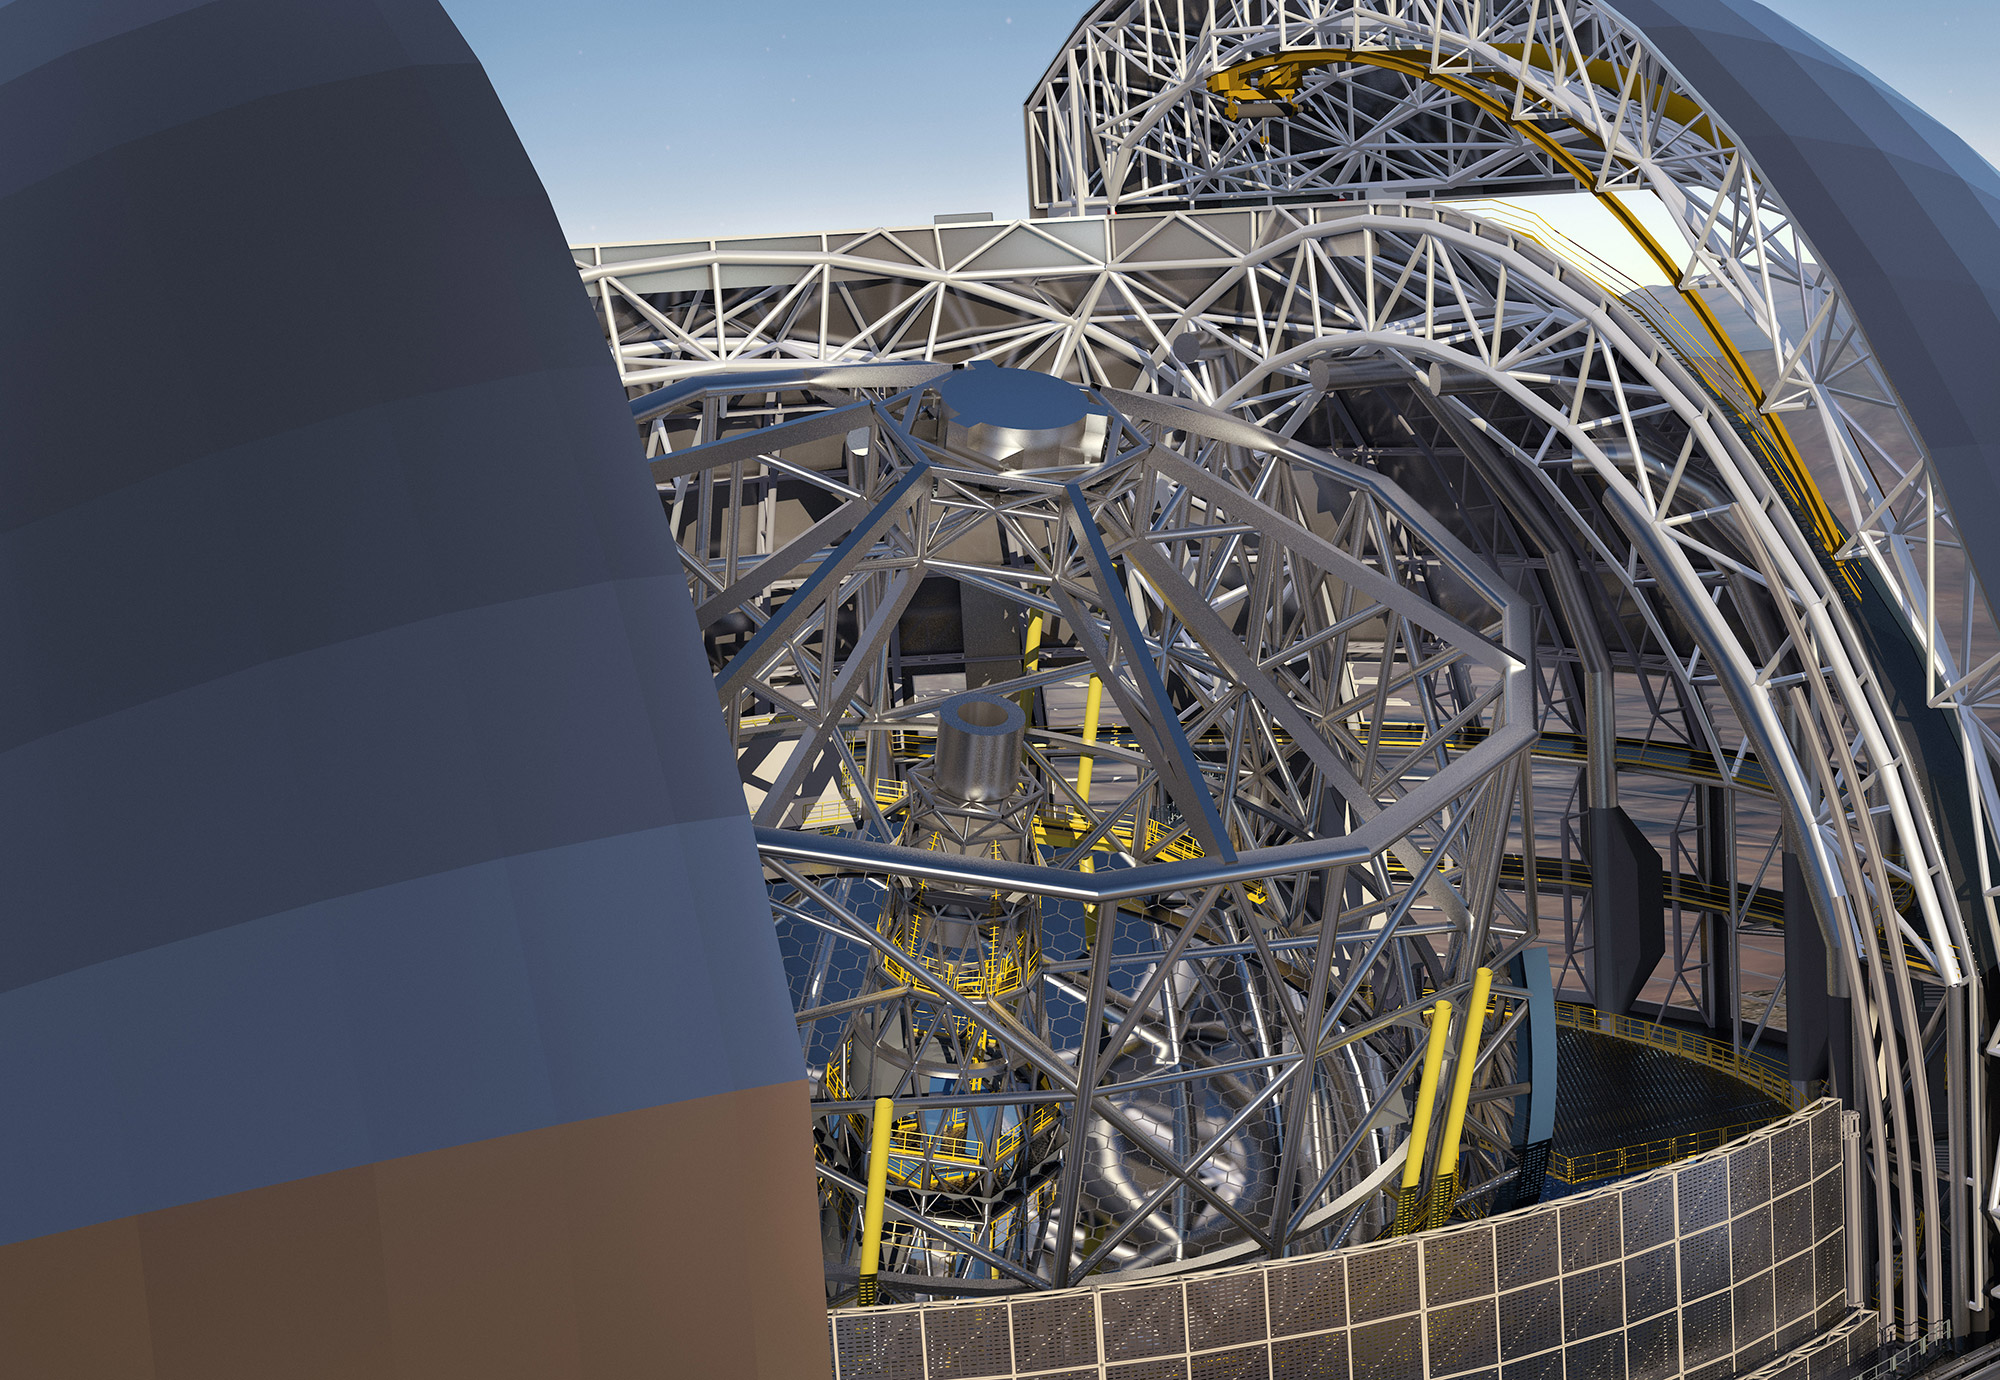 Image: In cooperation with PI (Physik Instrumente), the Fraunhofer Institute  for Applied Optics and Precision Engineering (IOF) is developing a new  actuator concept for the European Extremely Large Telescope (E-ELT).